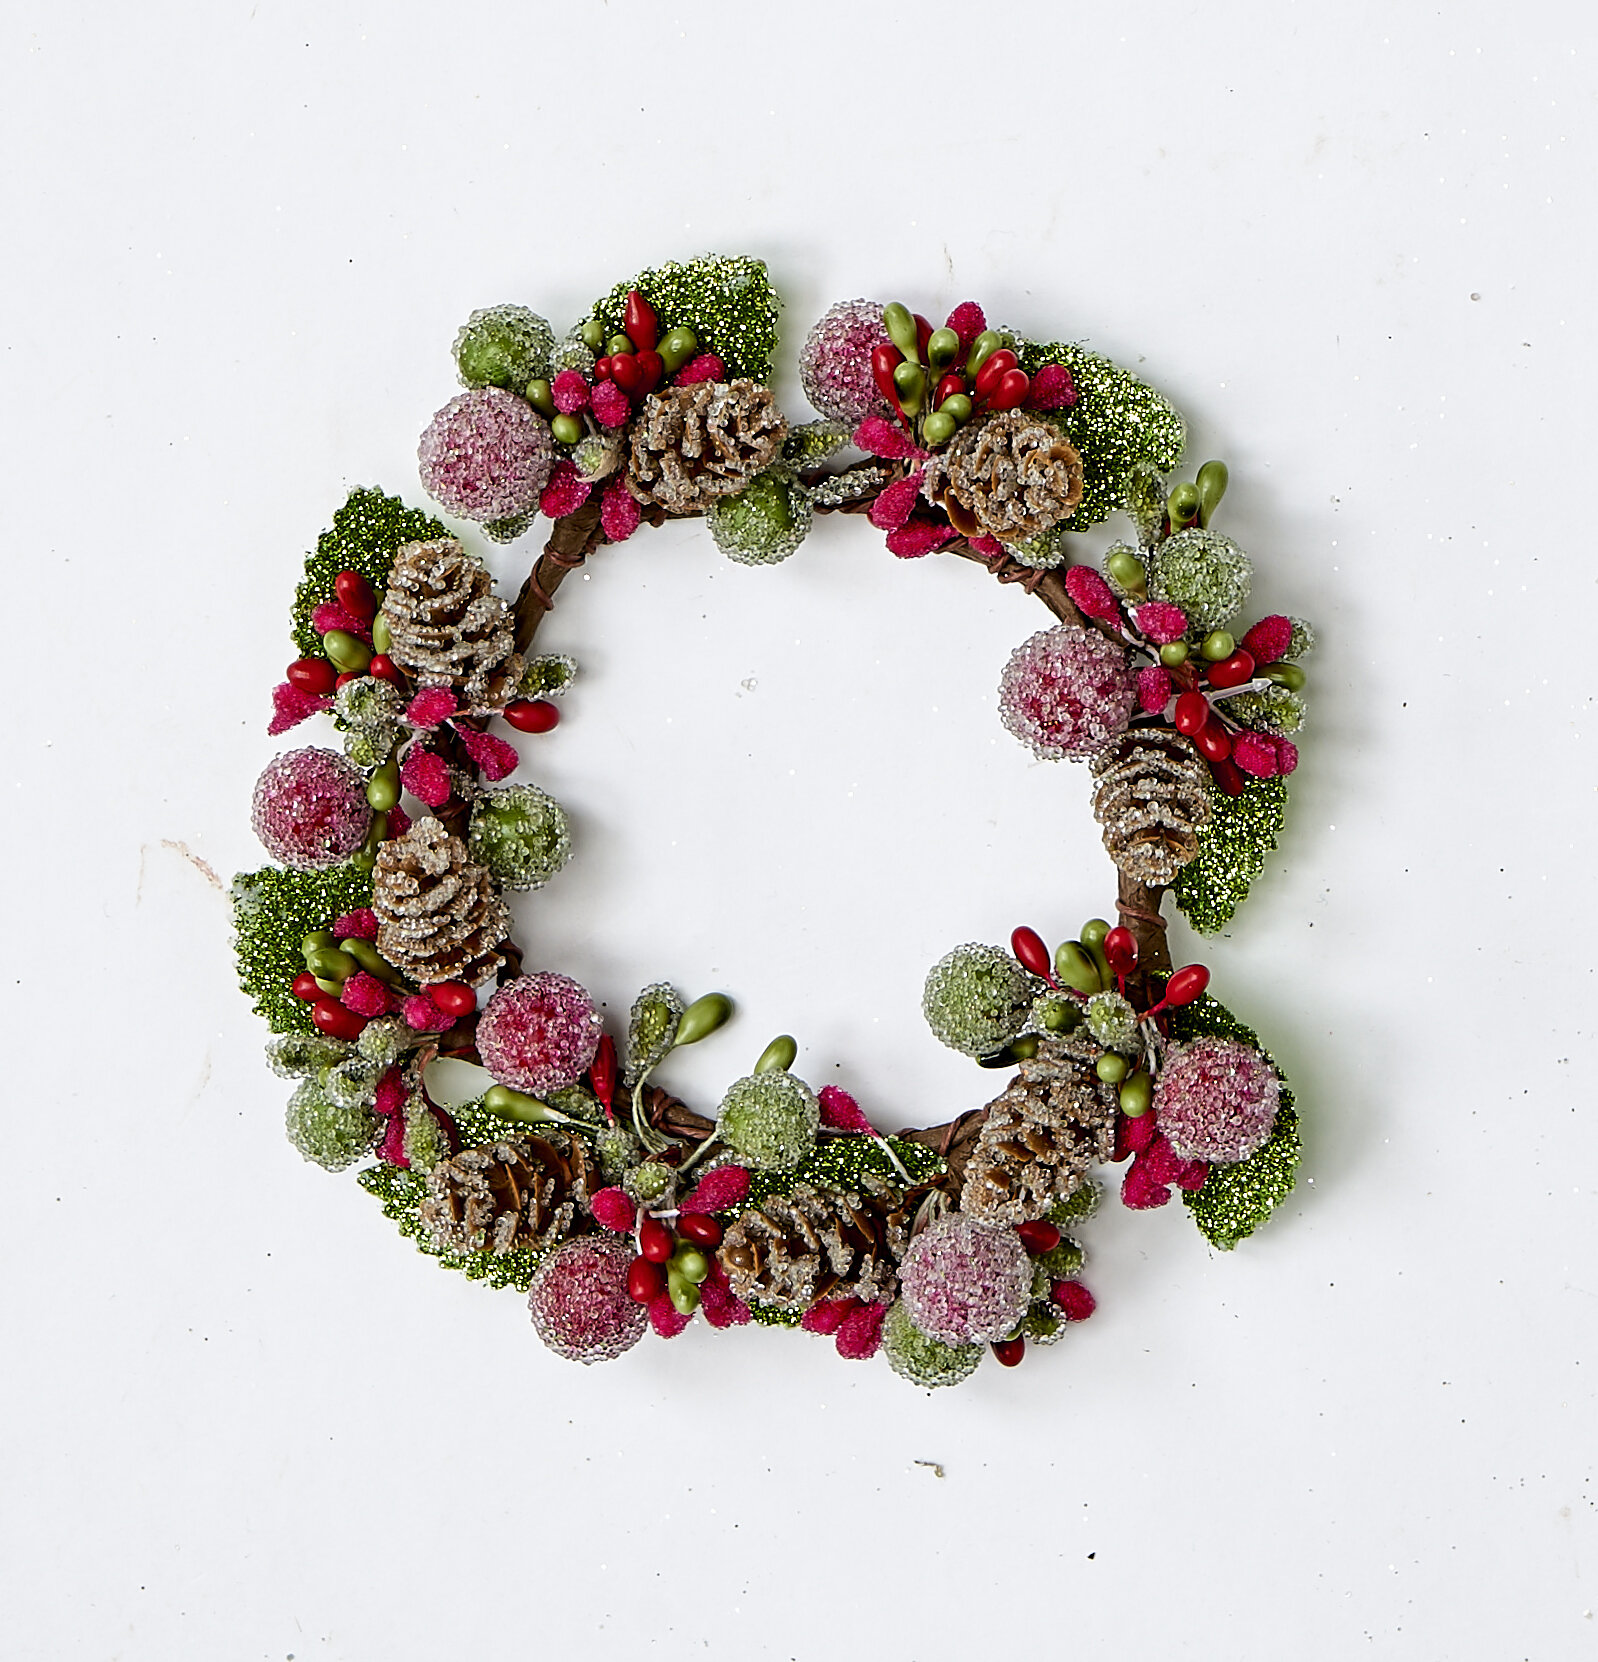 EUCALYPTUS & BERRIES CANDLE RING WREATH 14 " x 6 " CENTER opening